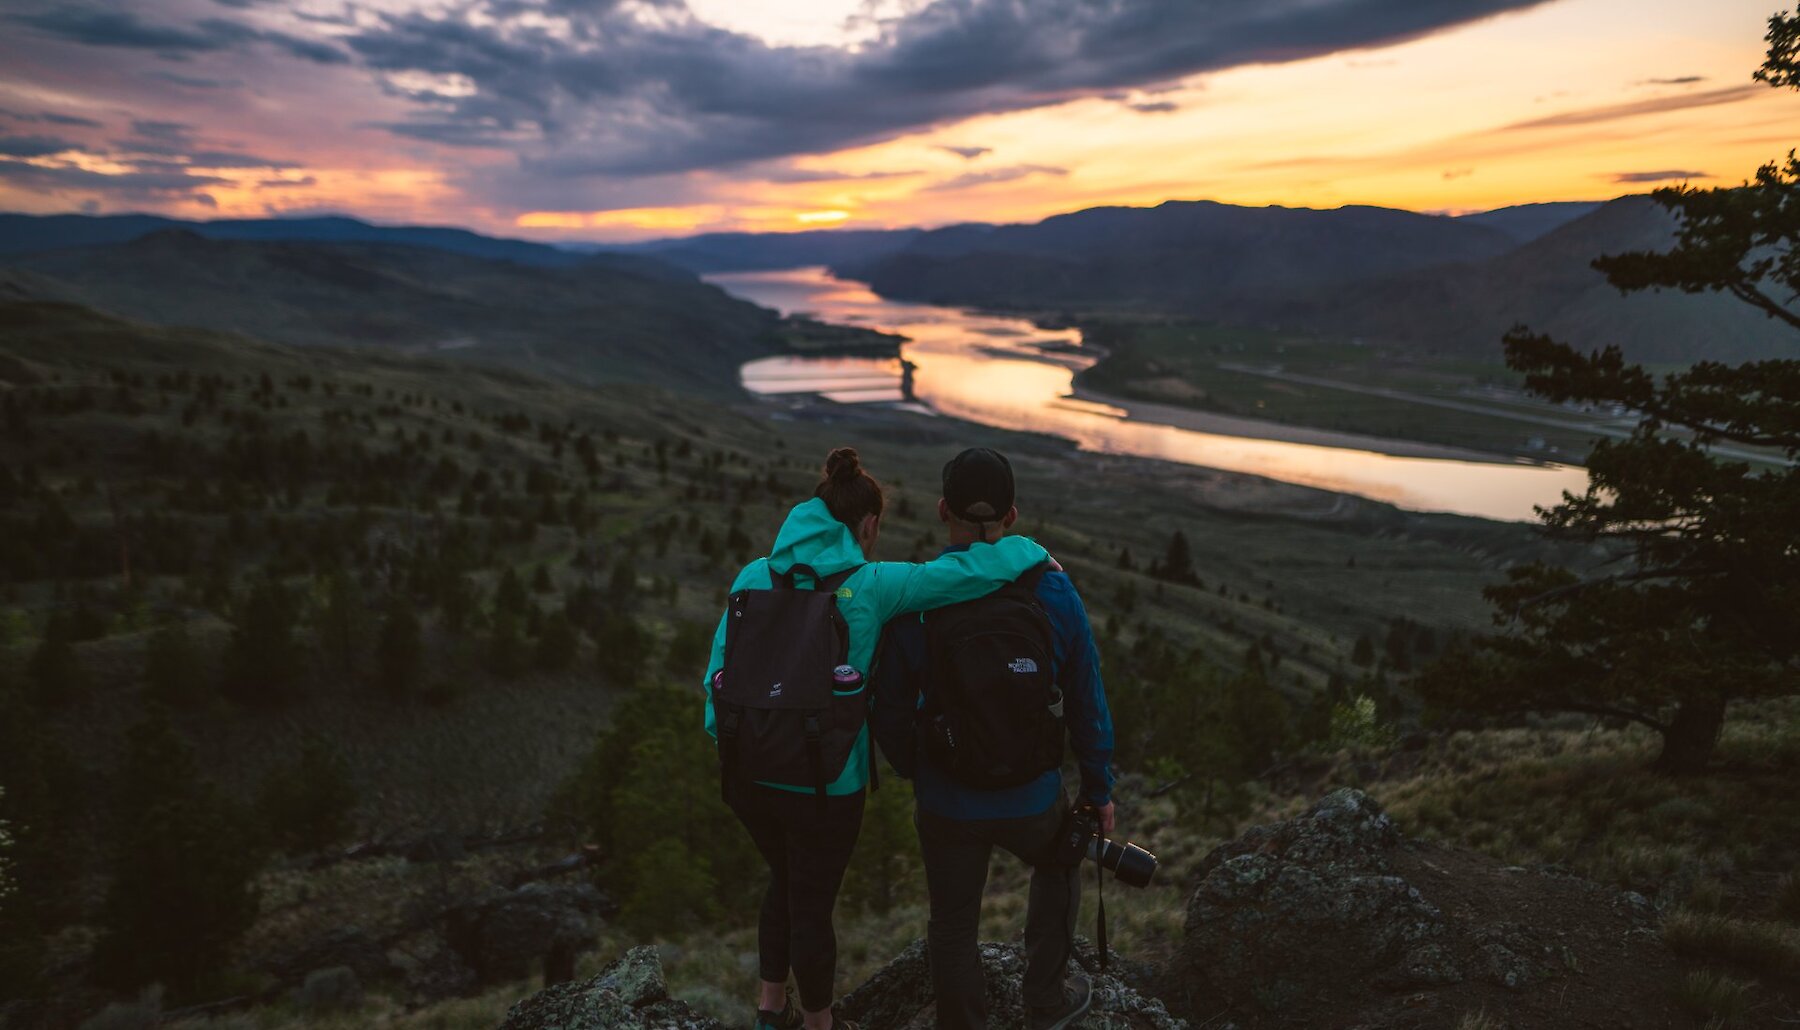 Two Hikers admiring the sunset in Kenna Cartwright Park in Kamloops BC.